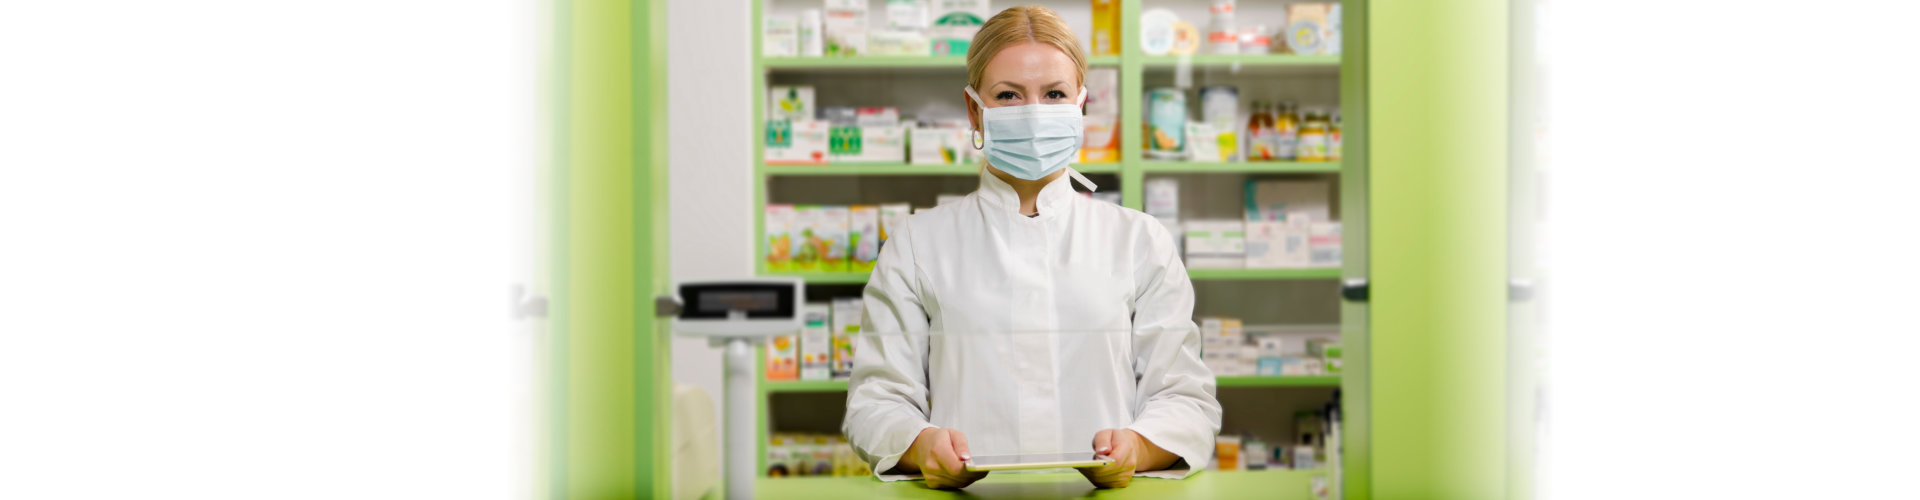 young female pharmacist with surgical mask